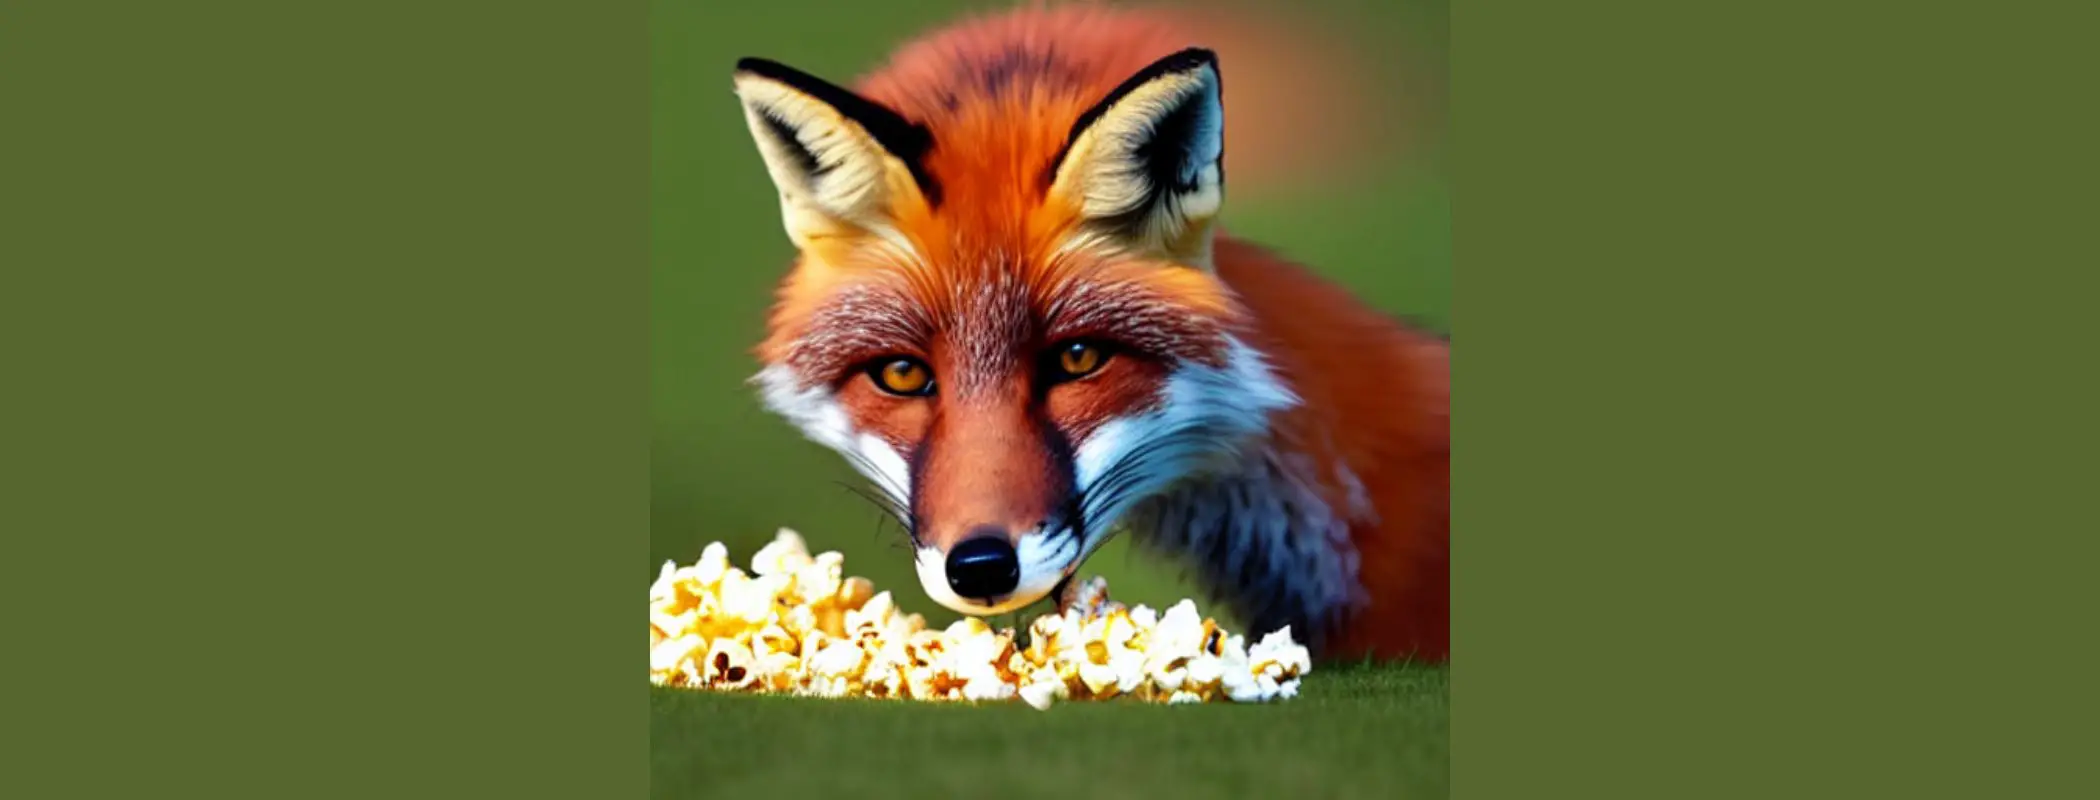 Can Foxes Eat Popcorn